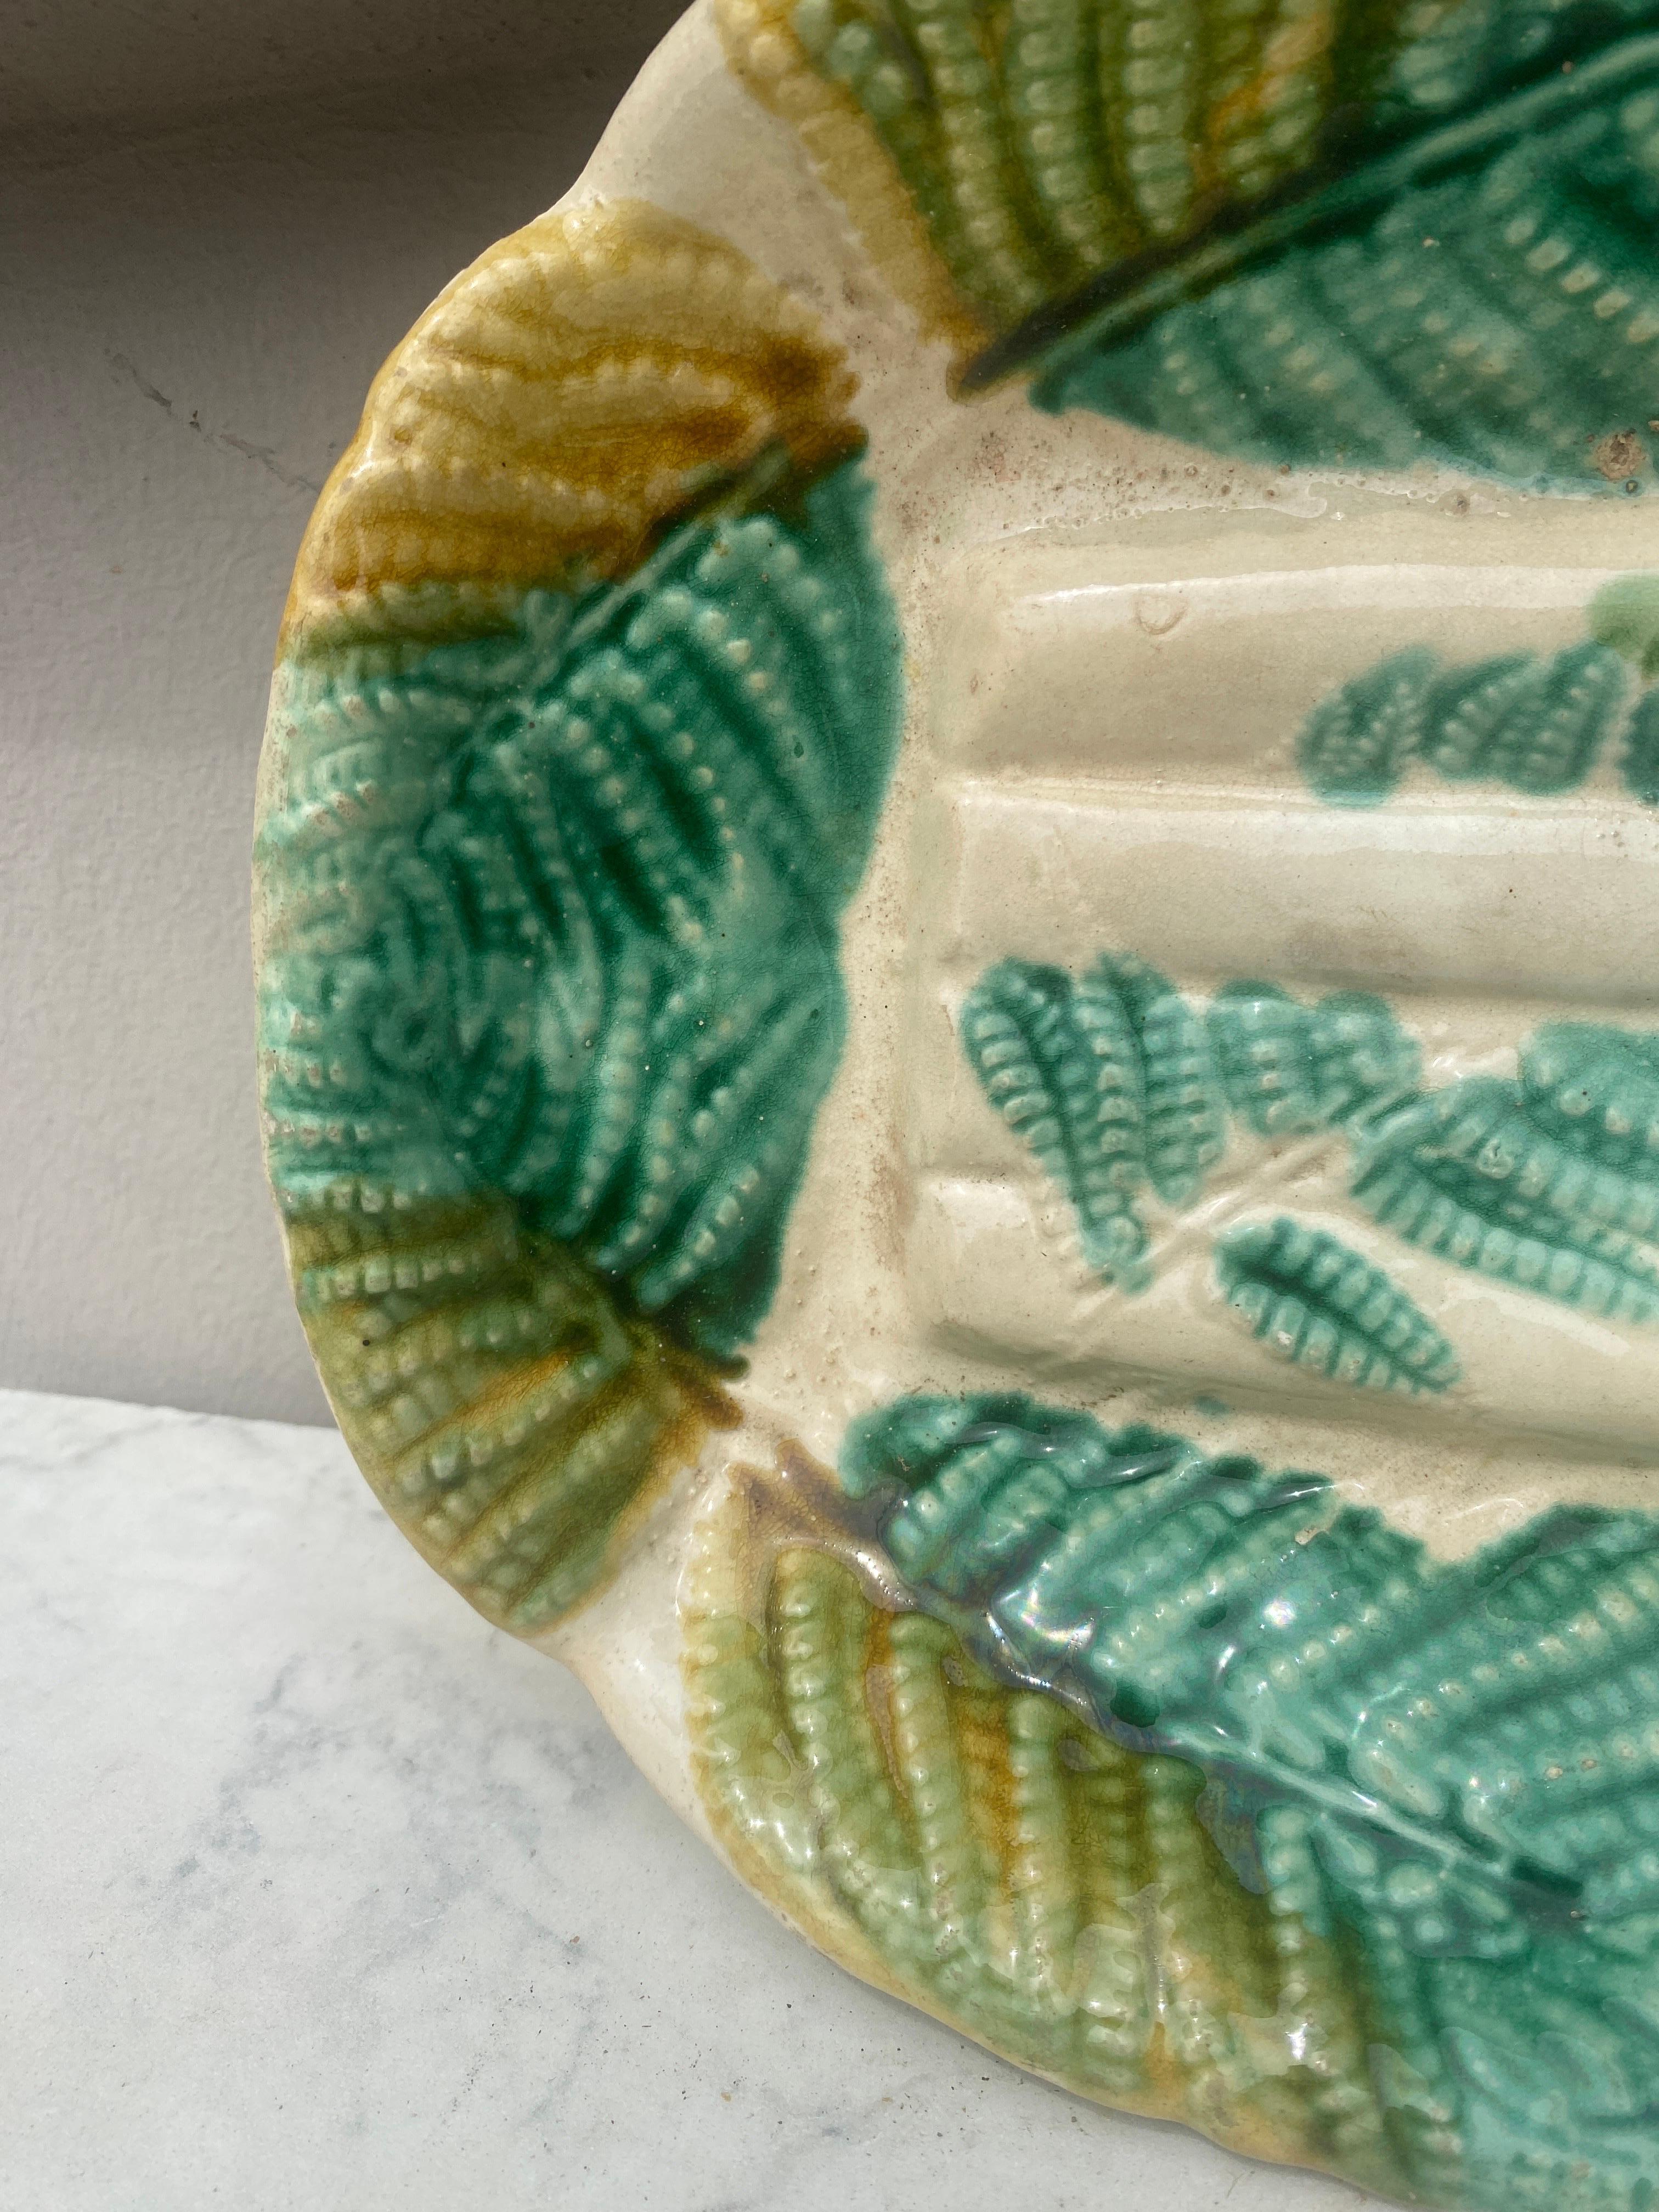 French Majolica asparagus platter Salins, circa 1880.
Decorated with ferns.